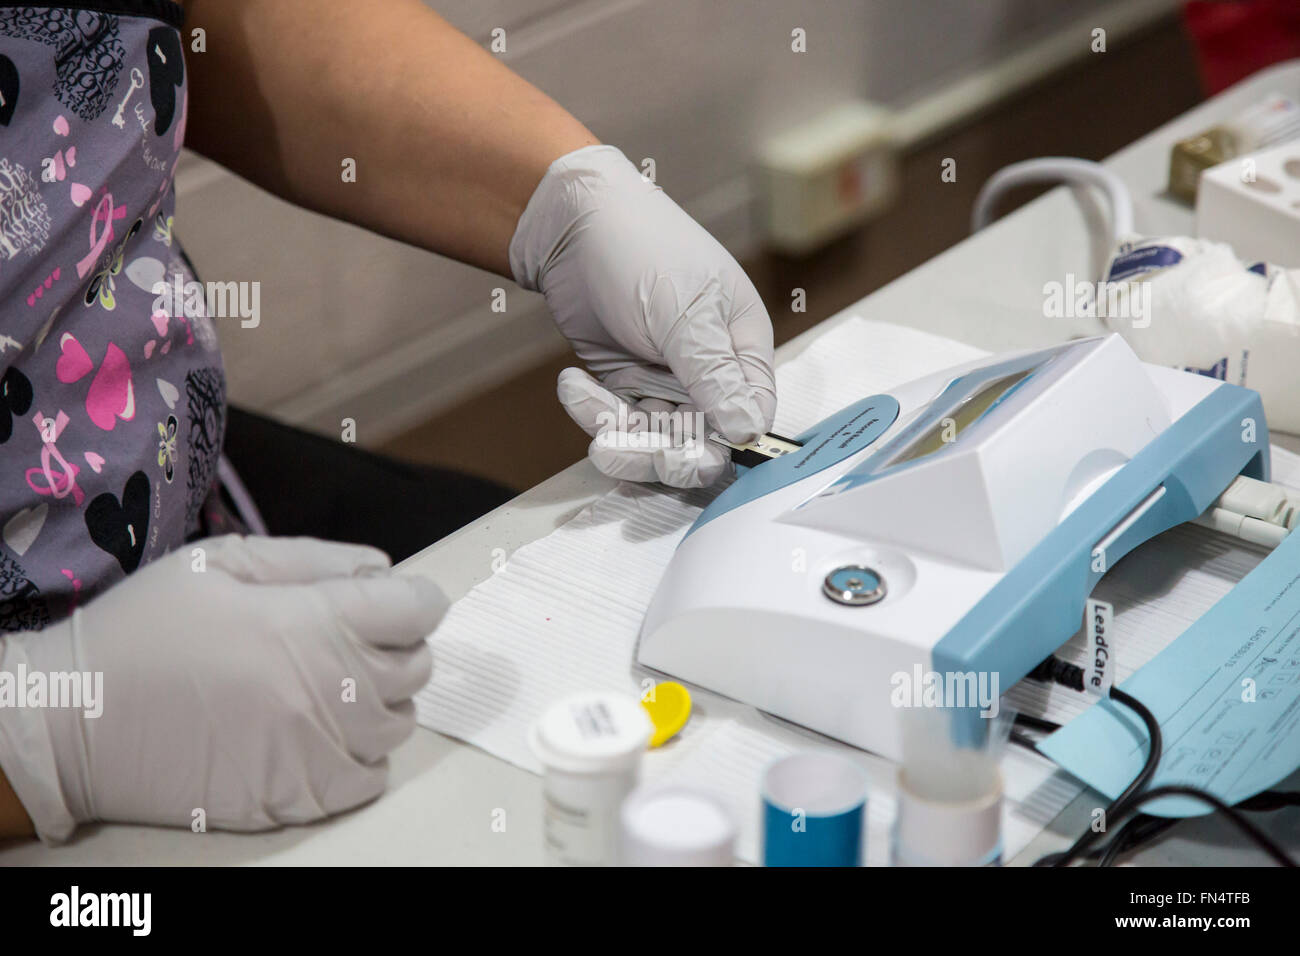 Flint, Michigan - A technican feeds a blood sample into a LeadCare Analyzer to check for the presence of lead. Stock Photo